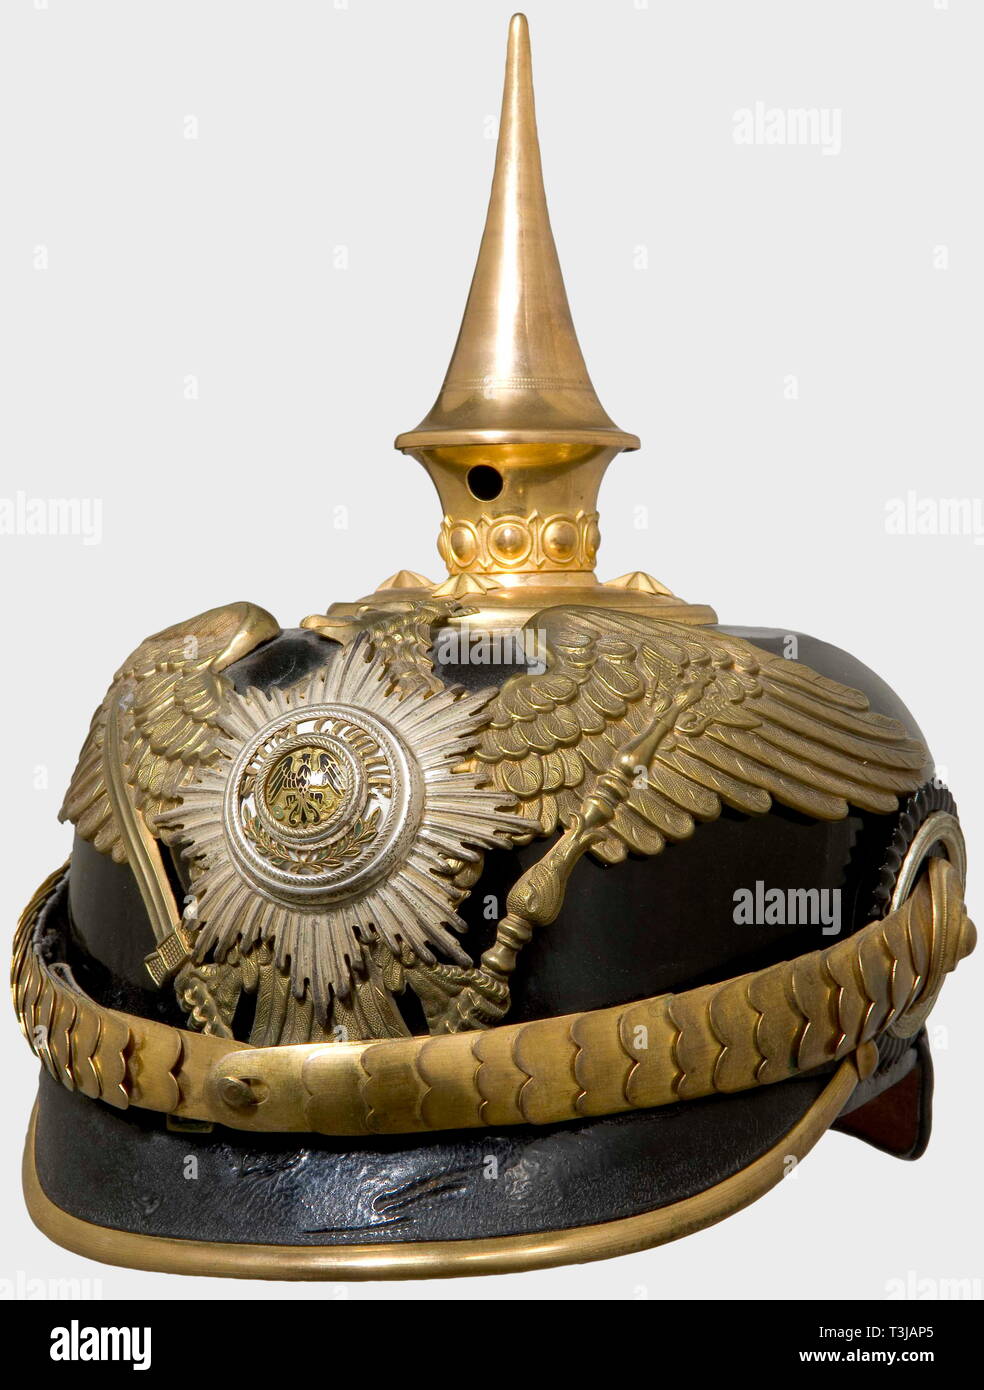 A helmet for an officer, of the Prussian Guard Train Battalion Black lacquered leather skull (age cracks) with gilt mountings, cambered metal chinscales, and guards eagle (worn by cleaning, pin resoldered) with a superimposed, silver-plated, enamelled star. Officer's cockades. The ribbed silk lining replaced. historic, historical, 19th century, Prussian, Prussia, German, Germany, militaria, military, object, objects, stills, clipping, clippings, cut out, cut-out, cut-outs, helmet, helmets, headpiece, headpieces, utensil, piece of equipment, utens, Additional-Rights-Clearance-Info-Not-Available Stock Photo